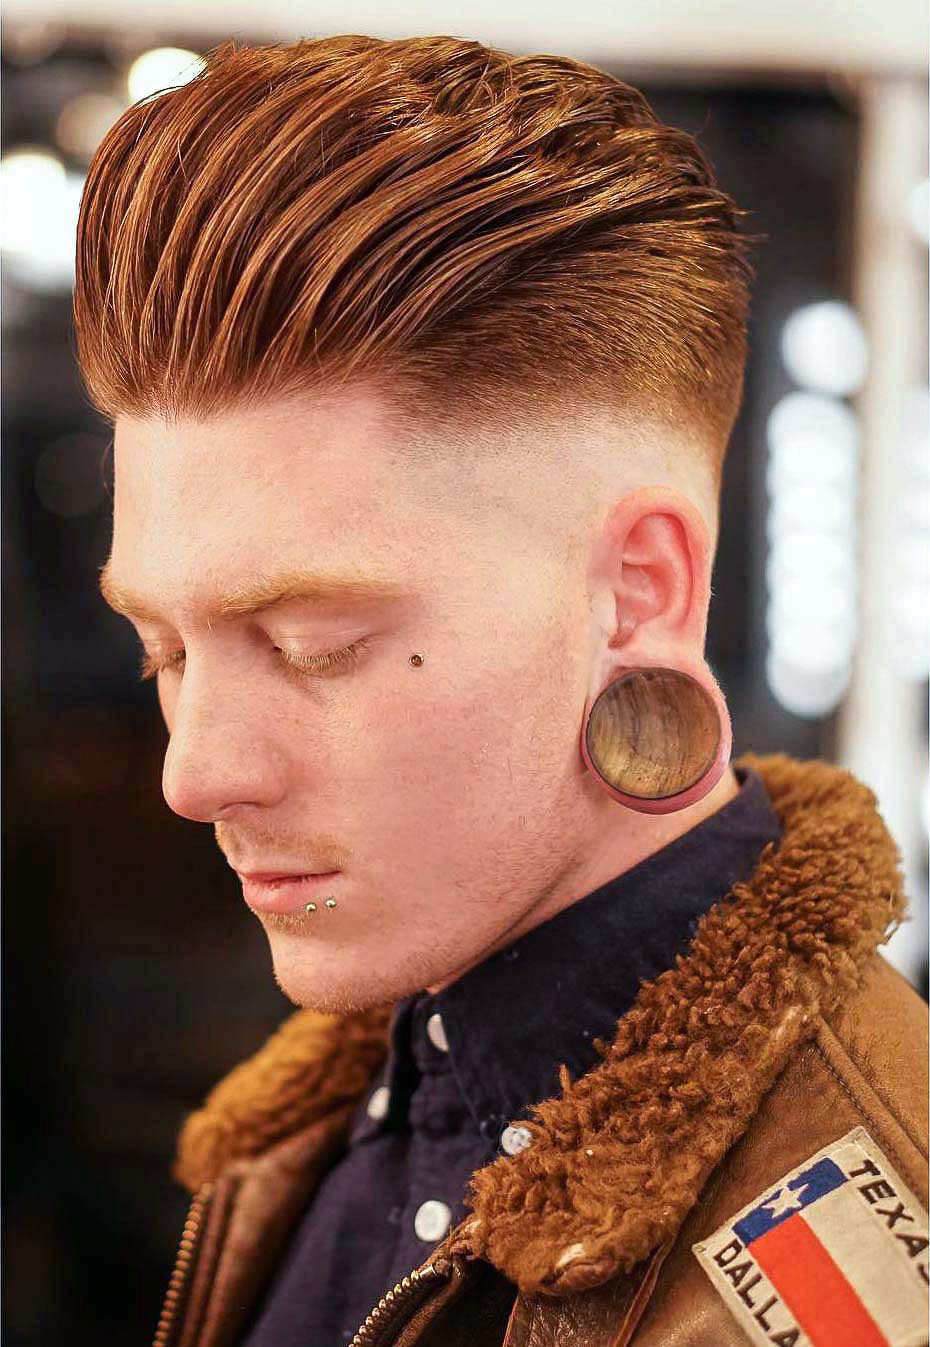 Loosely styled pompadour